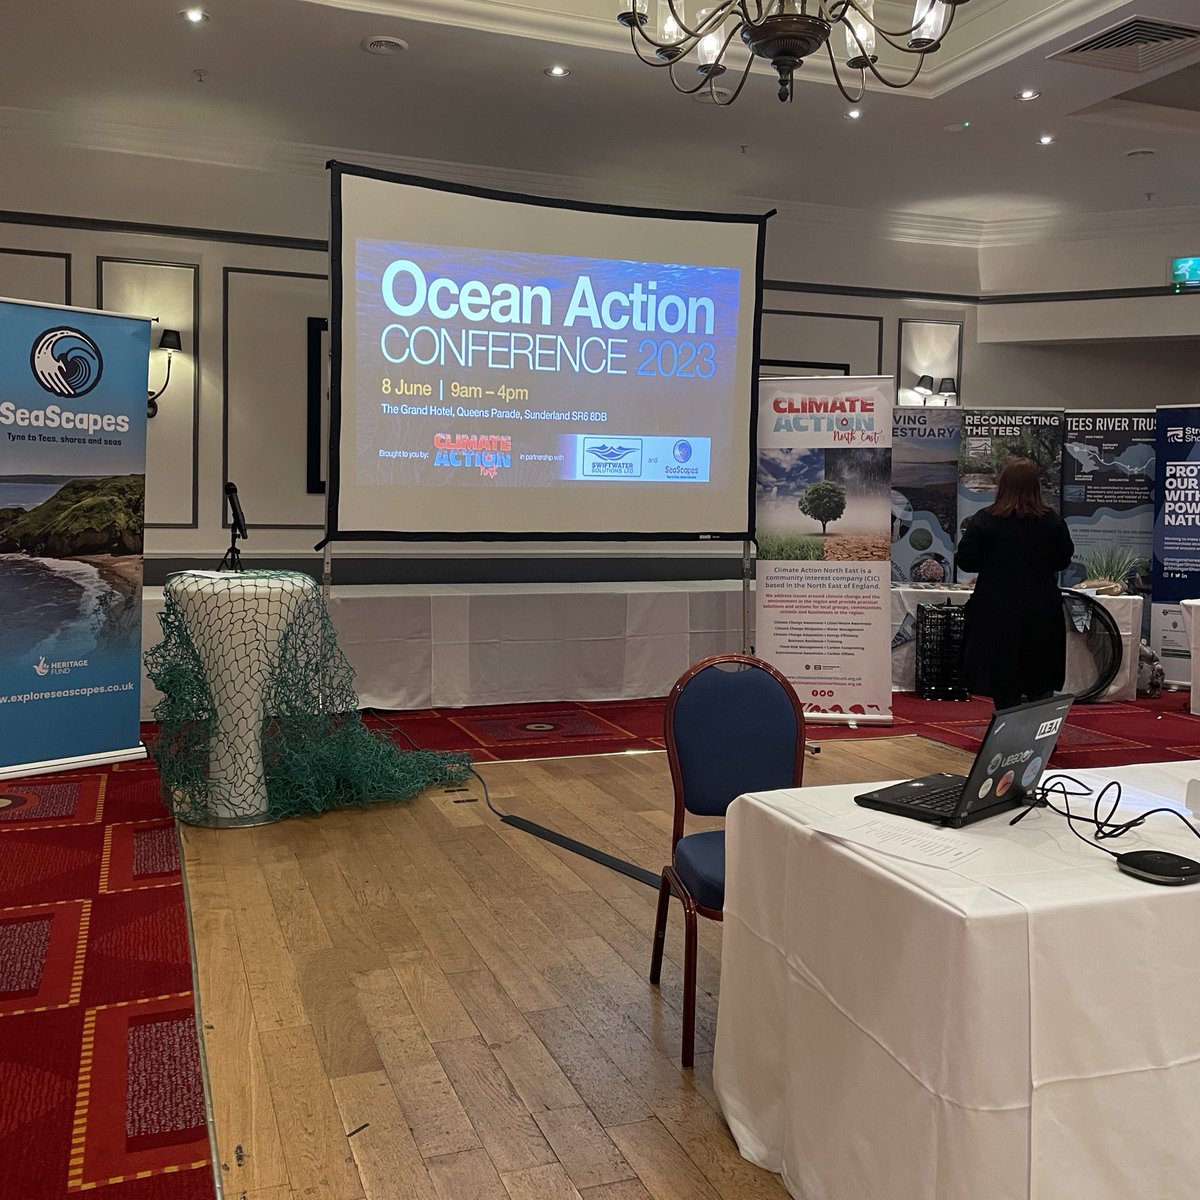 Excited to meet the rest of the marine community in the North East today at the @ClimateActionNE conference! 

What a way to celebrate world ocean day!

#oceanaction